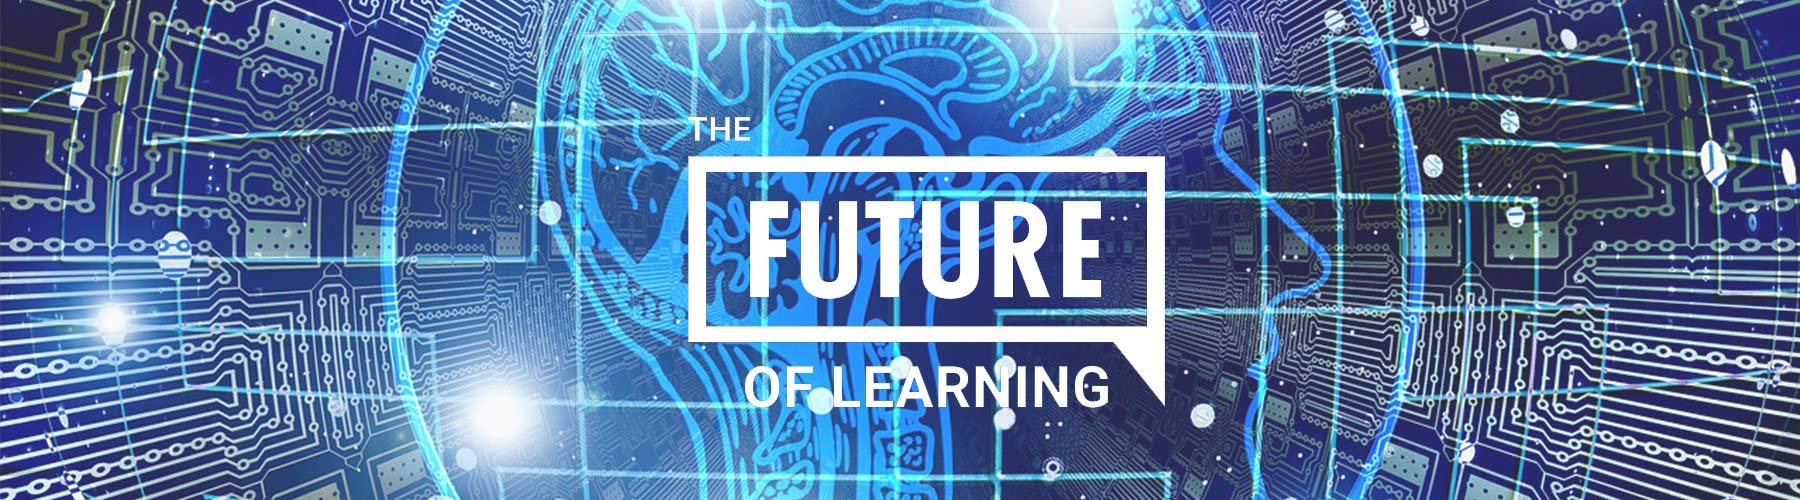 Future of Learning Conference